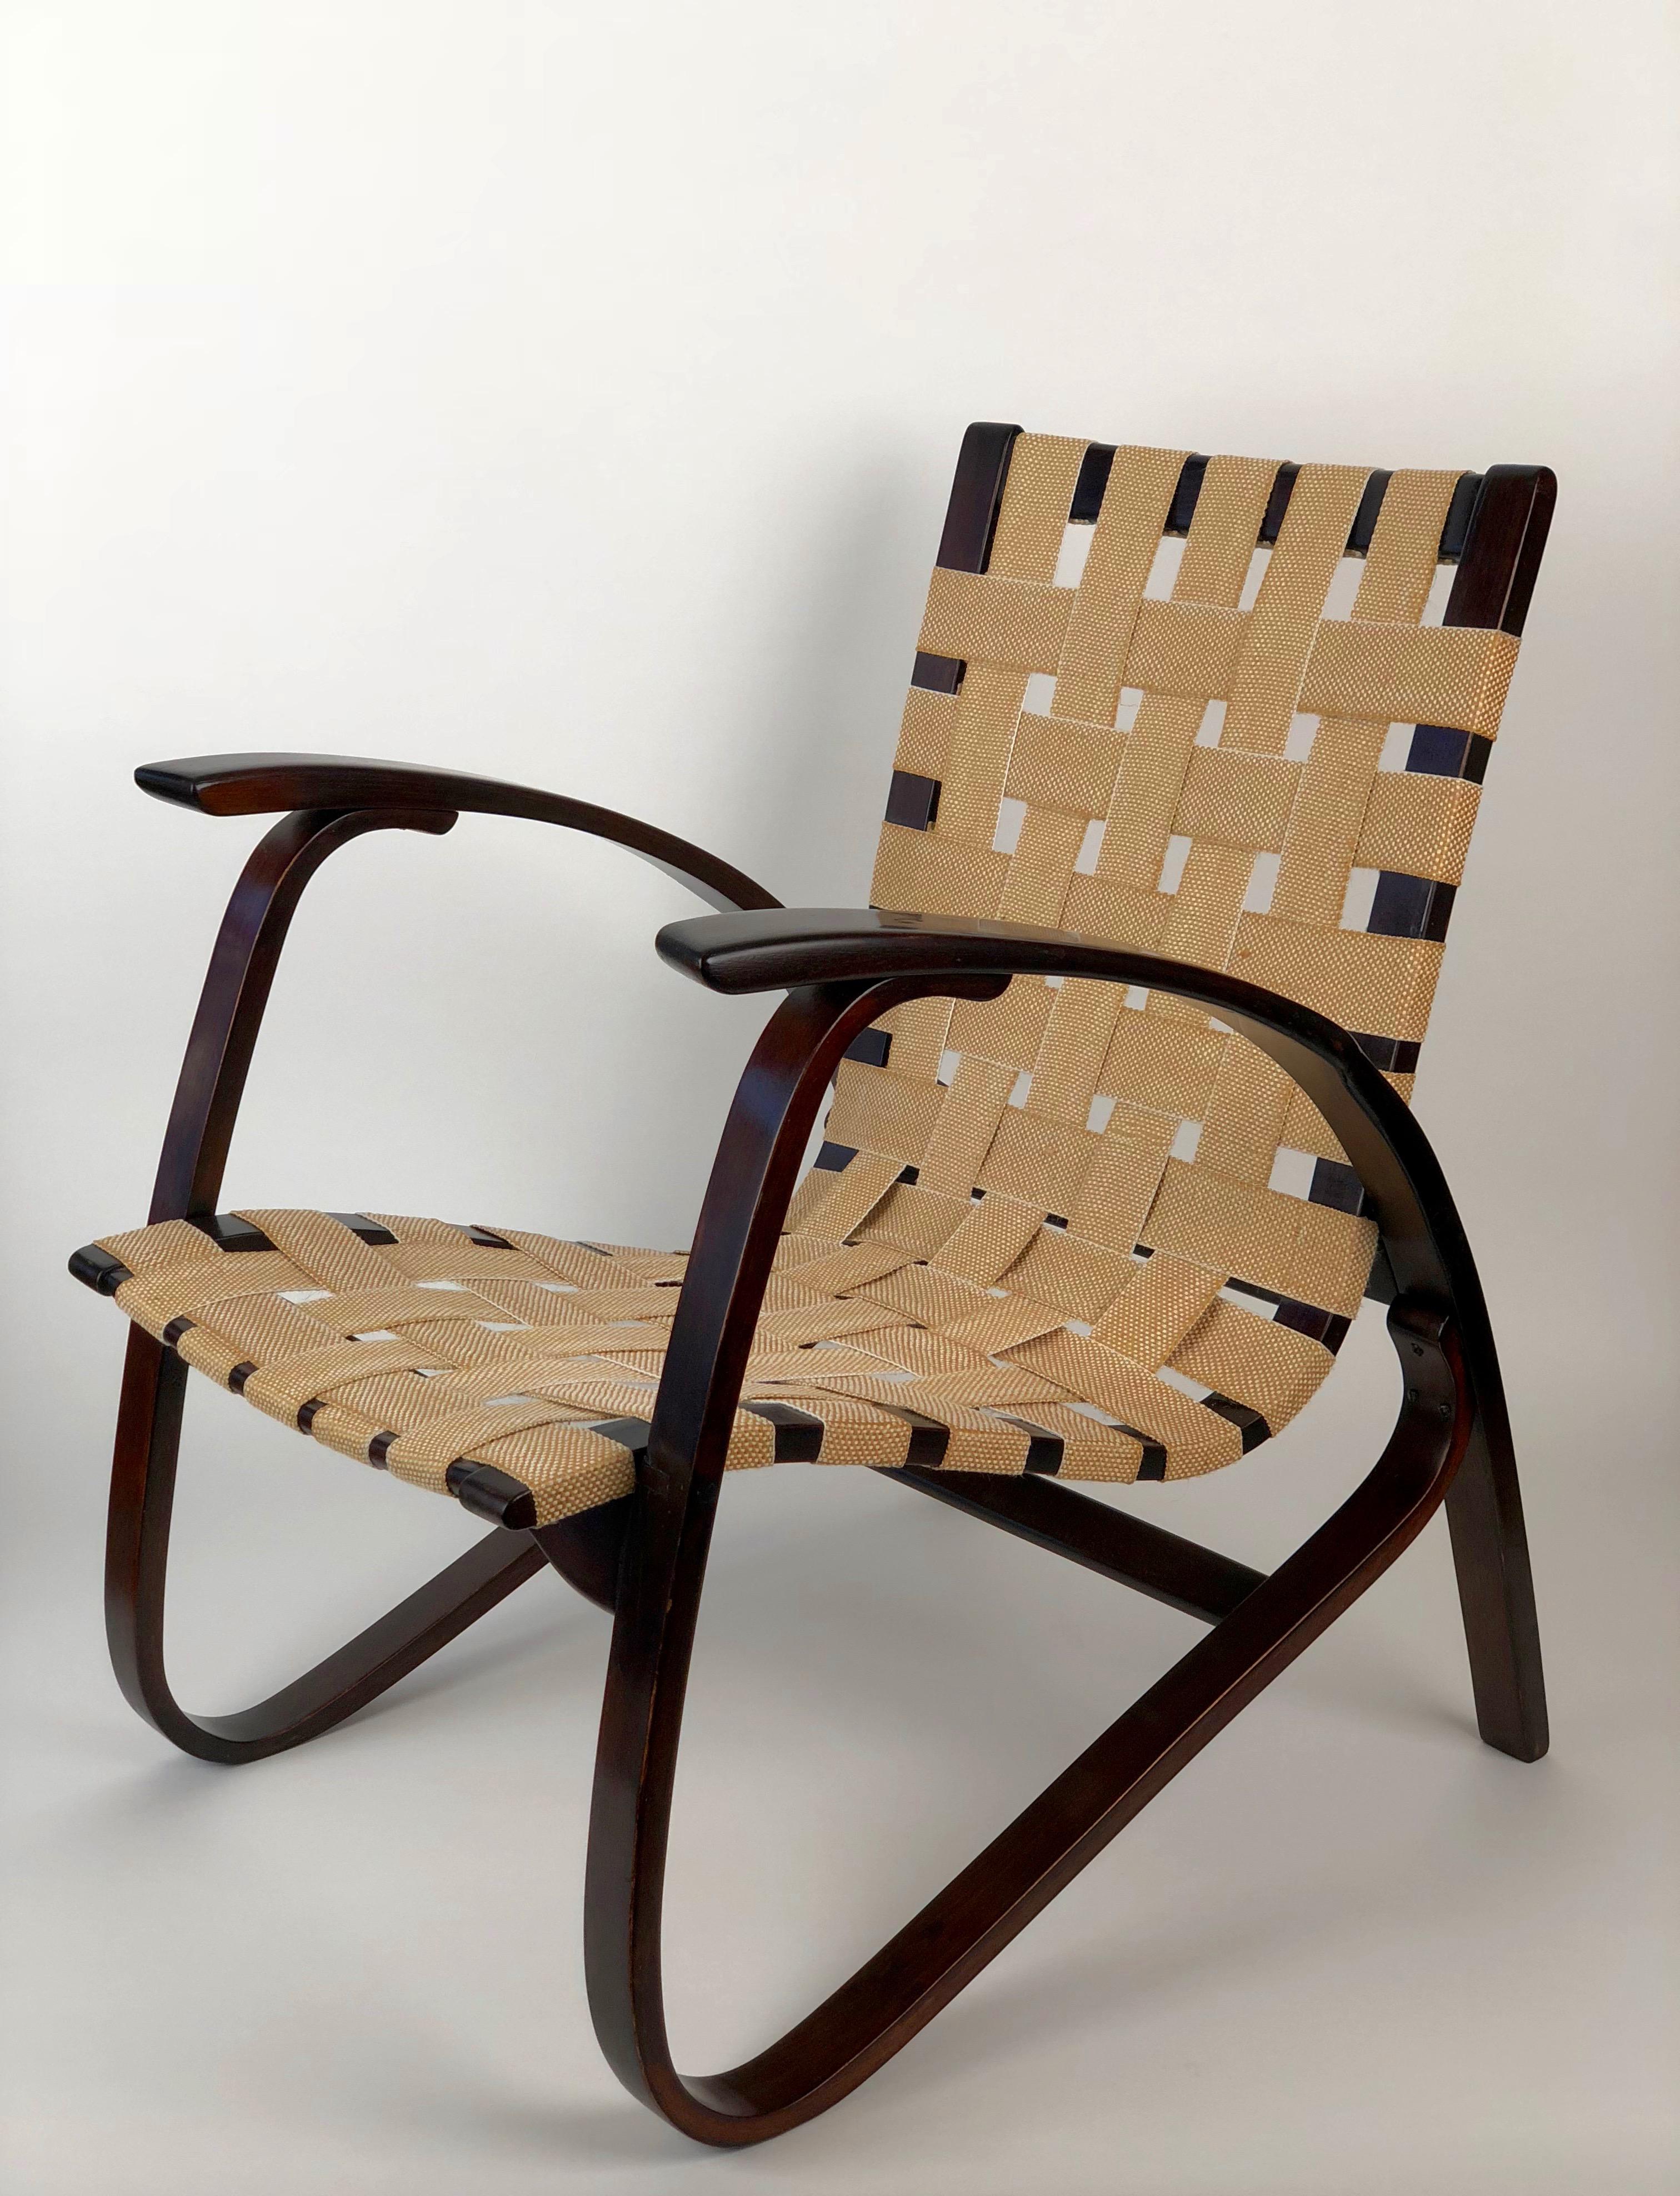 Hand-Crafted Bentwood Armchair by Jan Vanek for UP Zavody, Brno, Czech Republic, 1930s For Sale